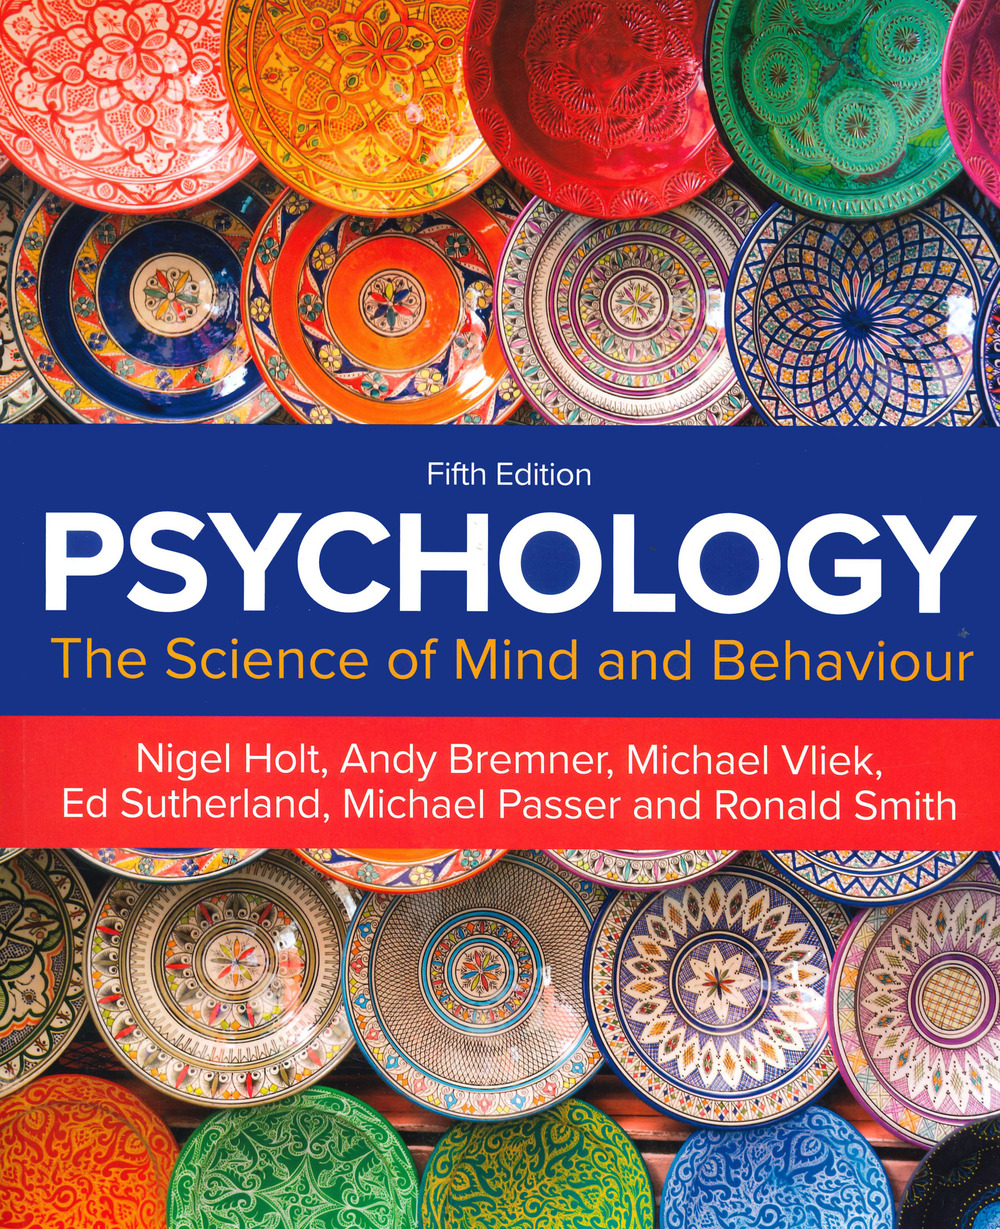 Psychology. The science of mind and behavior